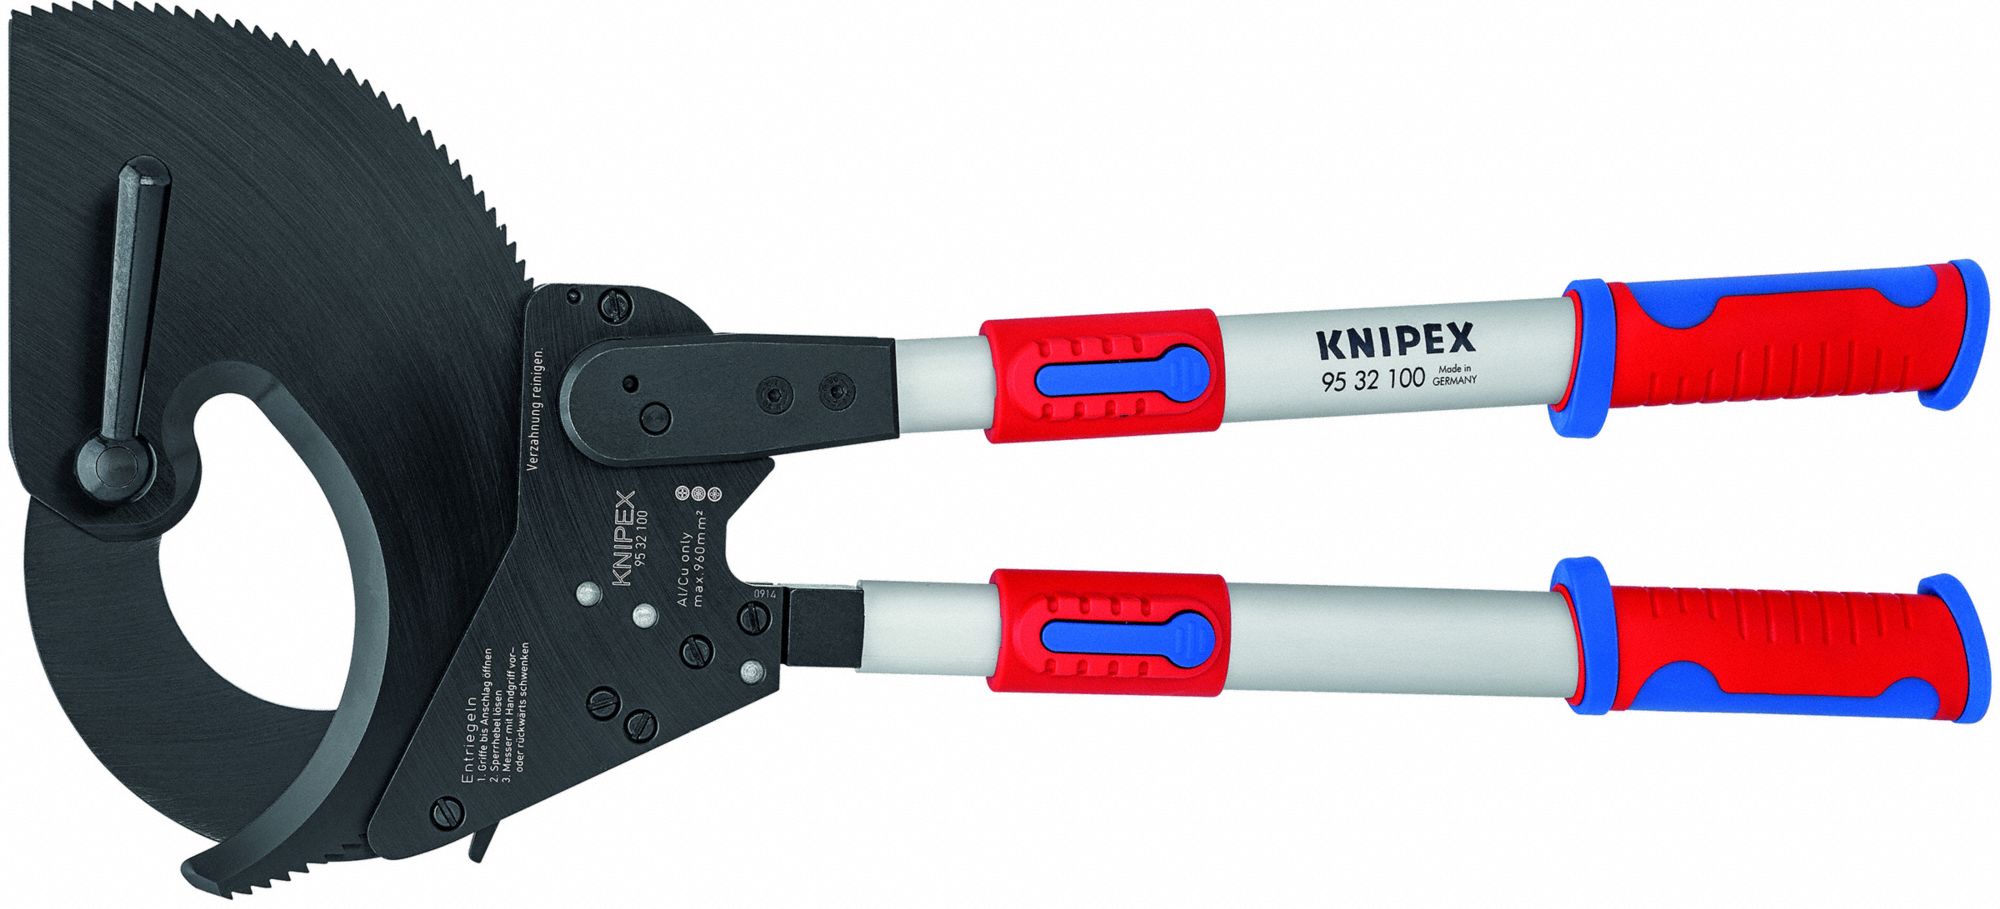 KNIPEX, Multi-Component Handle, Shear, Ratchet Cable Cutter - 10U151